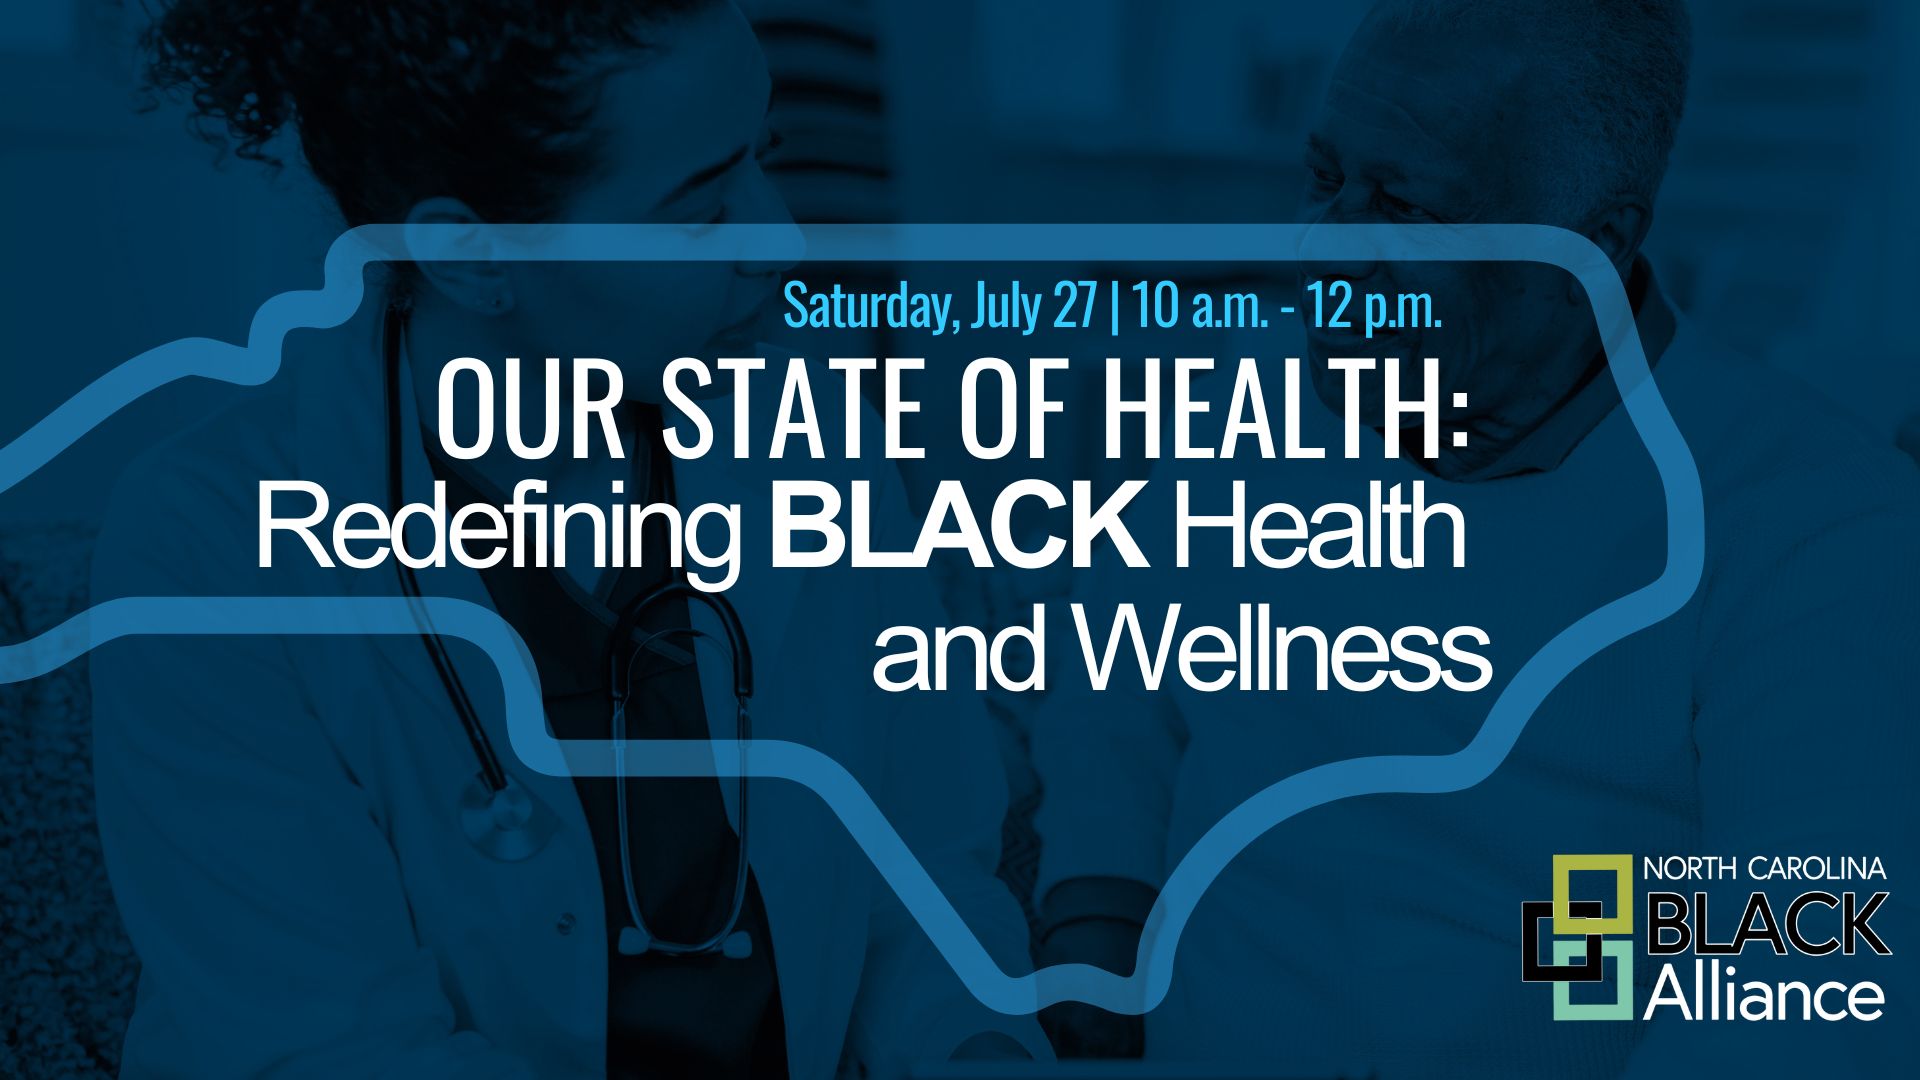 Redefining BLACK Health and Wellness